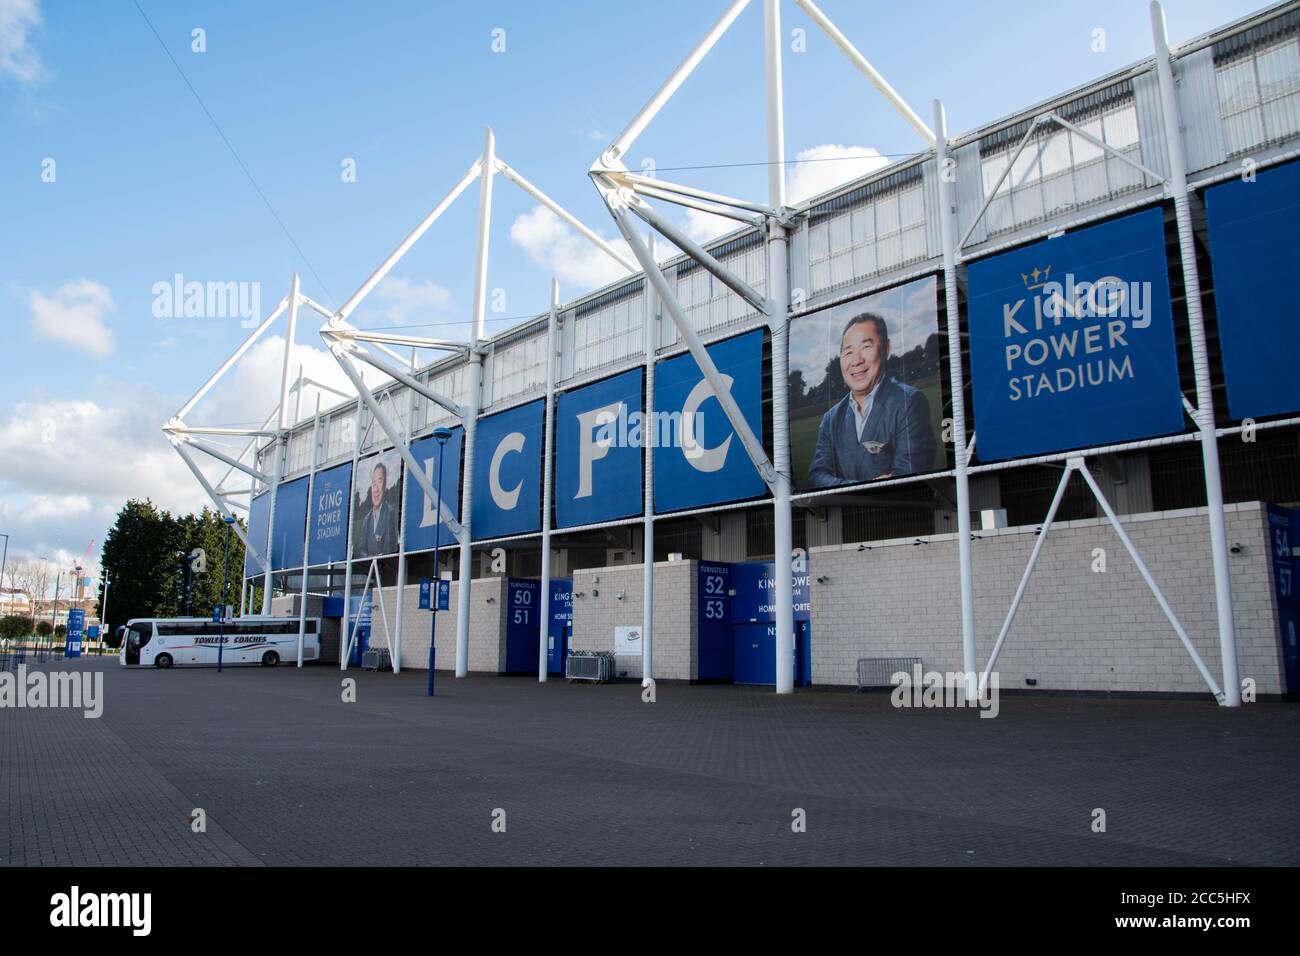 Leicester city football club King Power Stadium empty with no fans Stock Photo